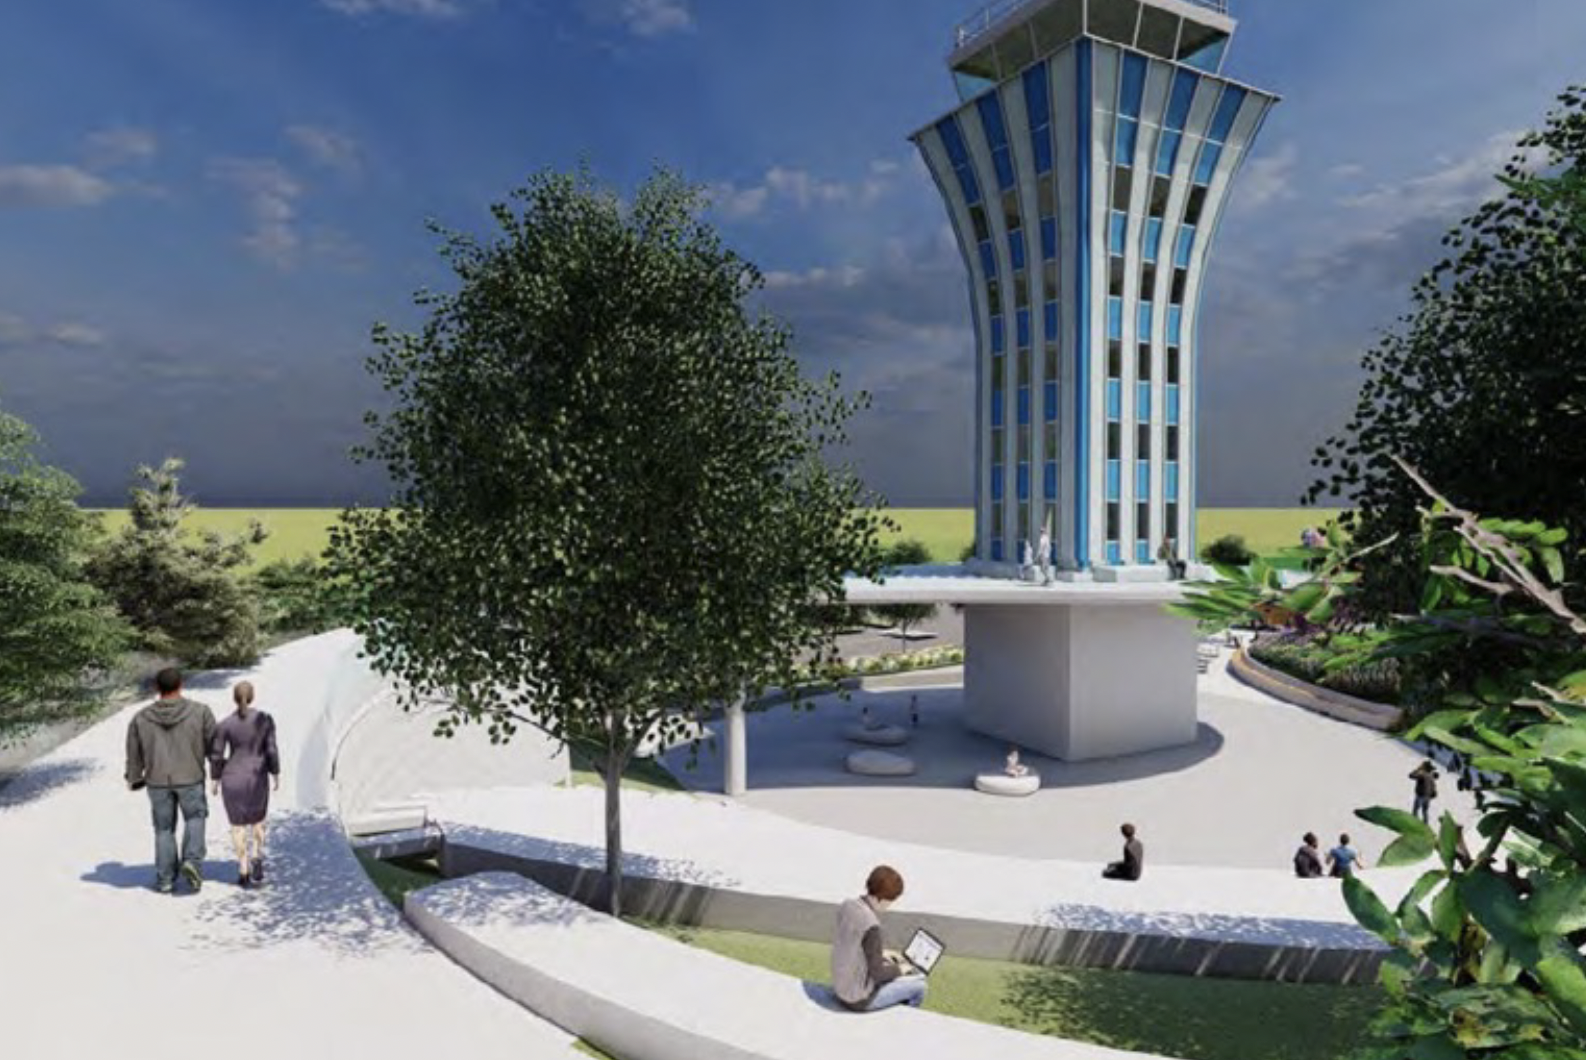 Take a Look at the Latest Control Tower Plaza Design